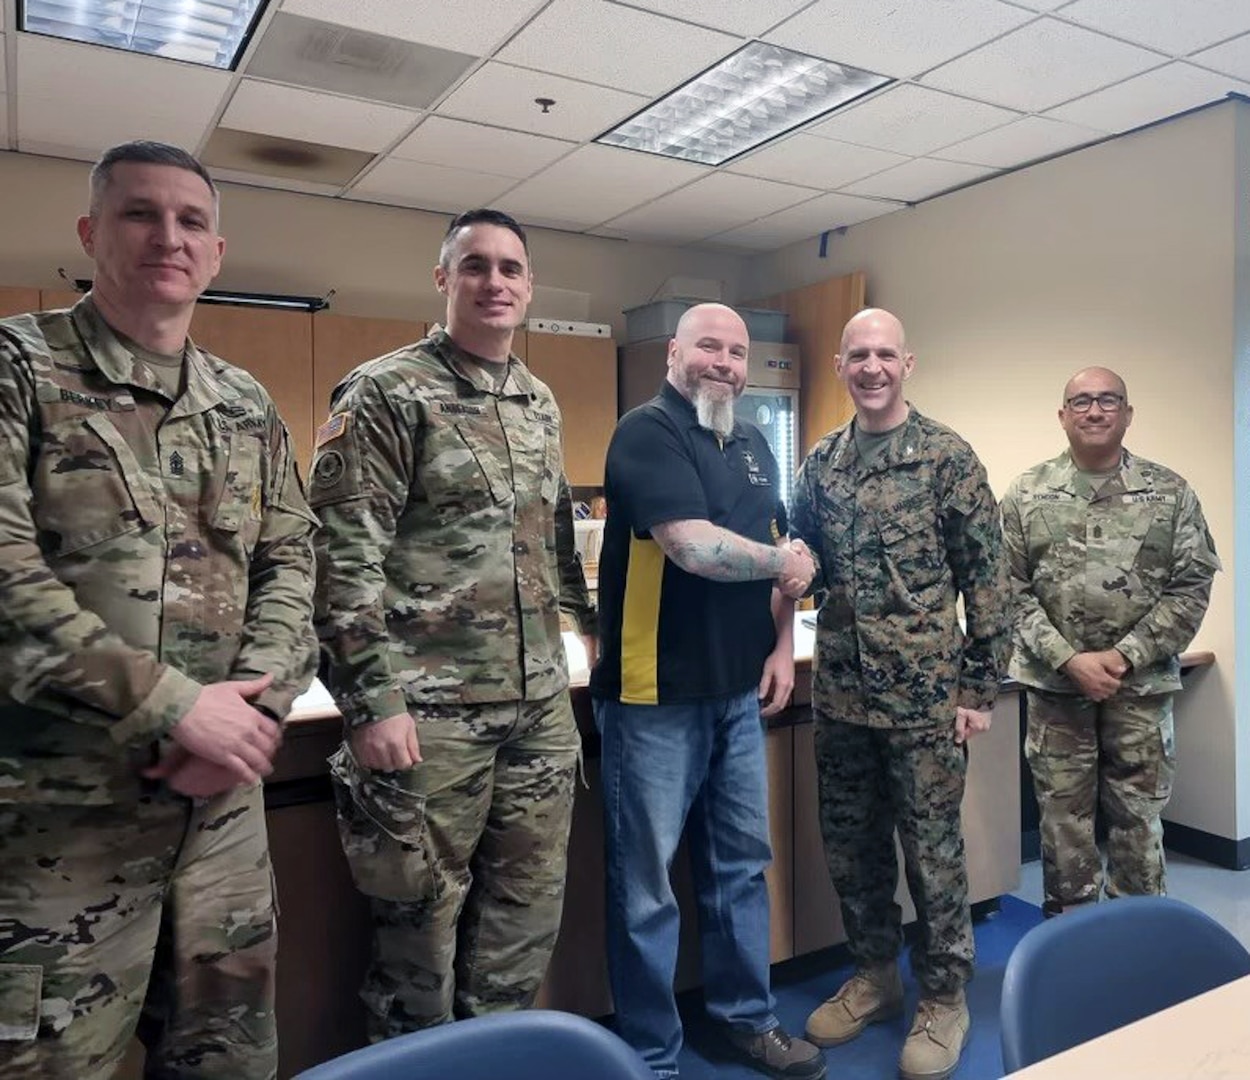 Dave Foland, administrative support technician, Portland MEPS, (center) is presented with the Western Sector Coin for Excellence by Marine Corps Col. Jesse Sjoberg, USMEPCOM Western Sector commander. Foland was recognized for intervening and disarming a possible active shooter in Troutdale, Ore.